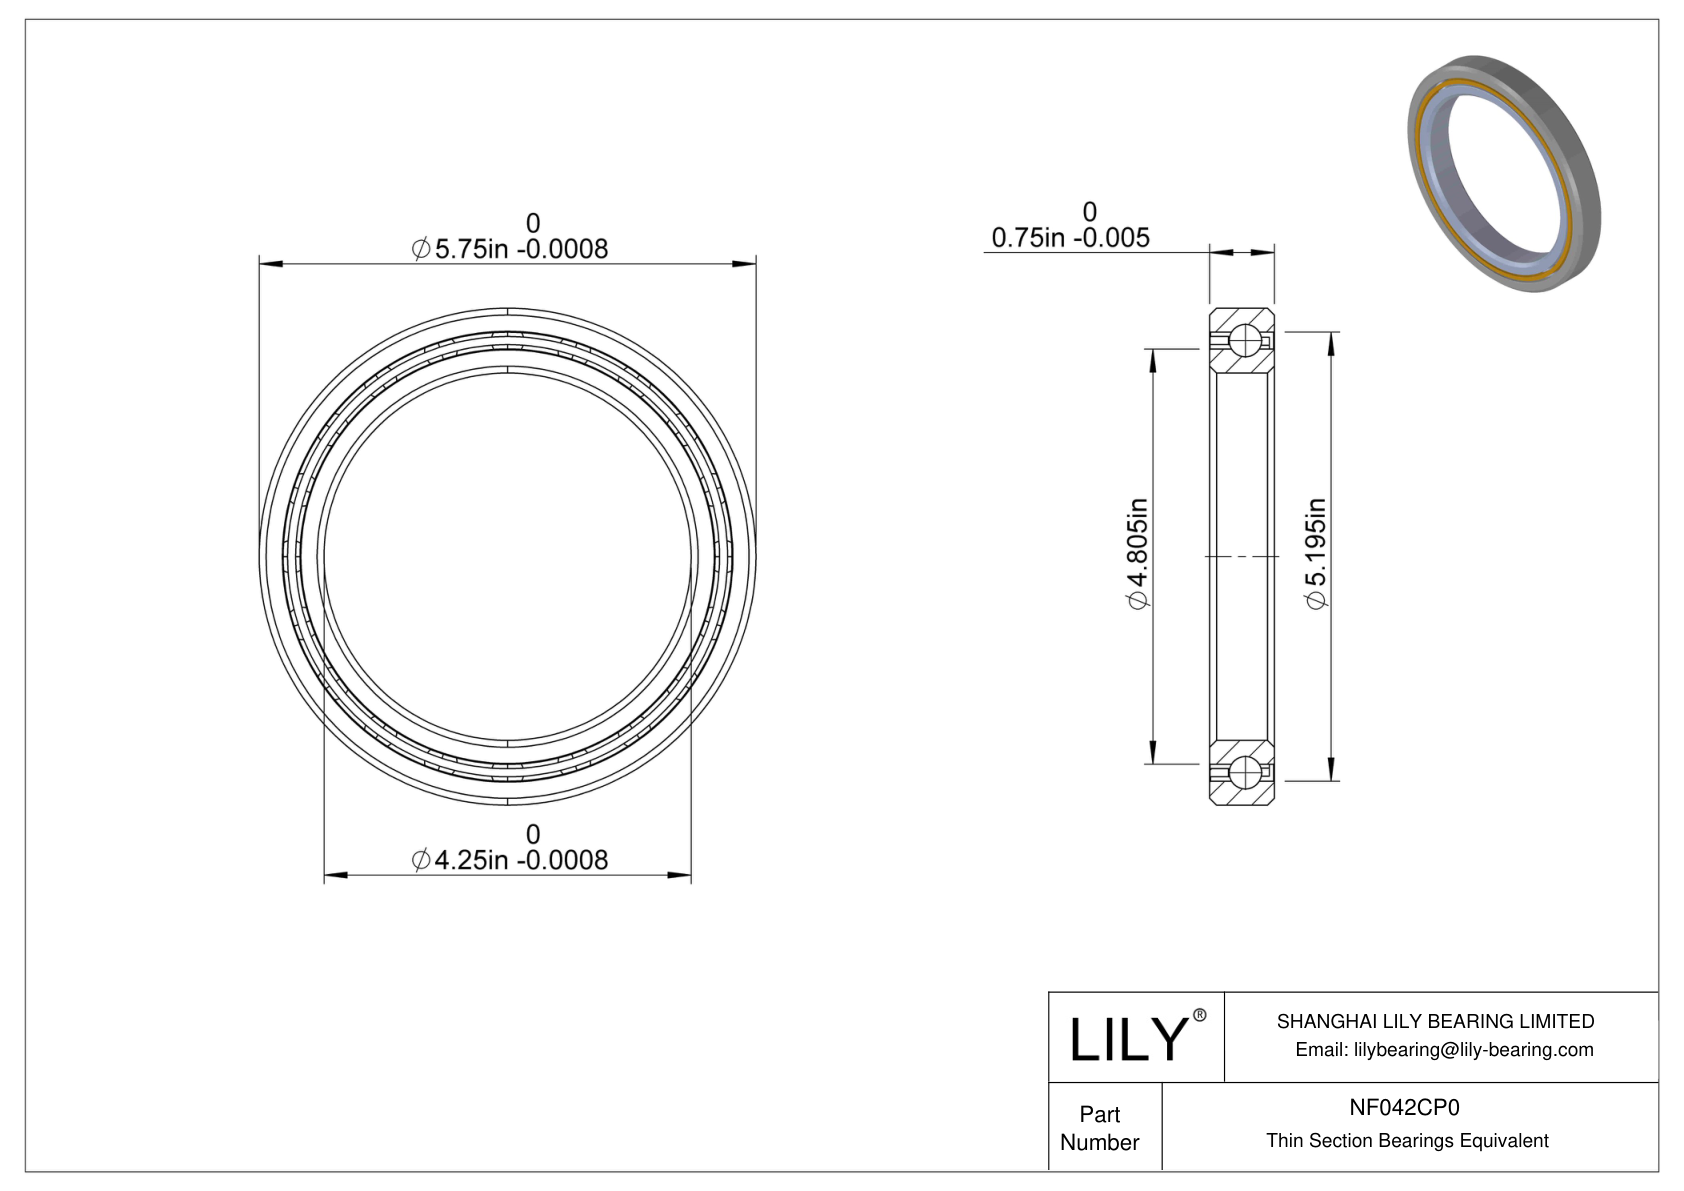 NF042CP0 Constant Section (CS) Bearings cad drawing